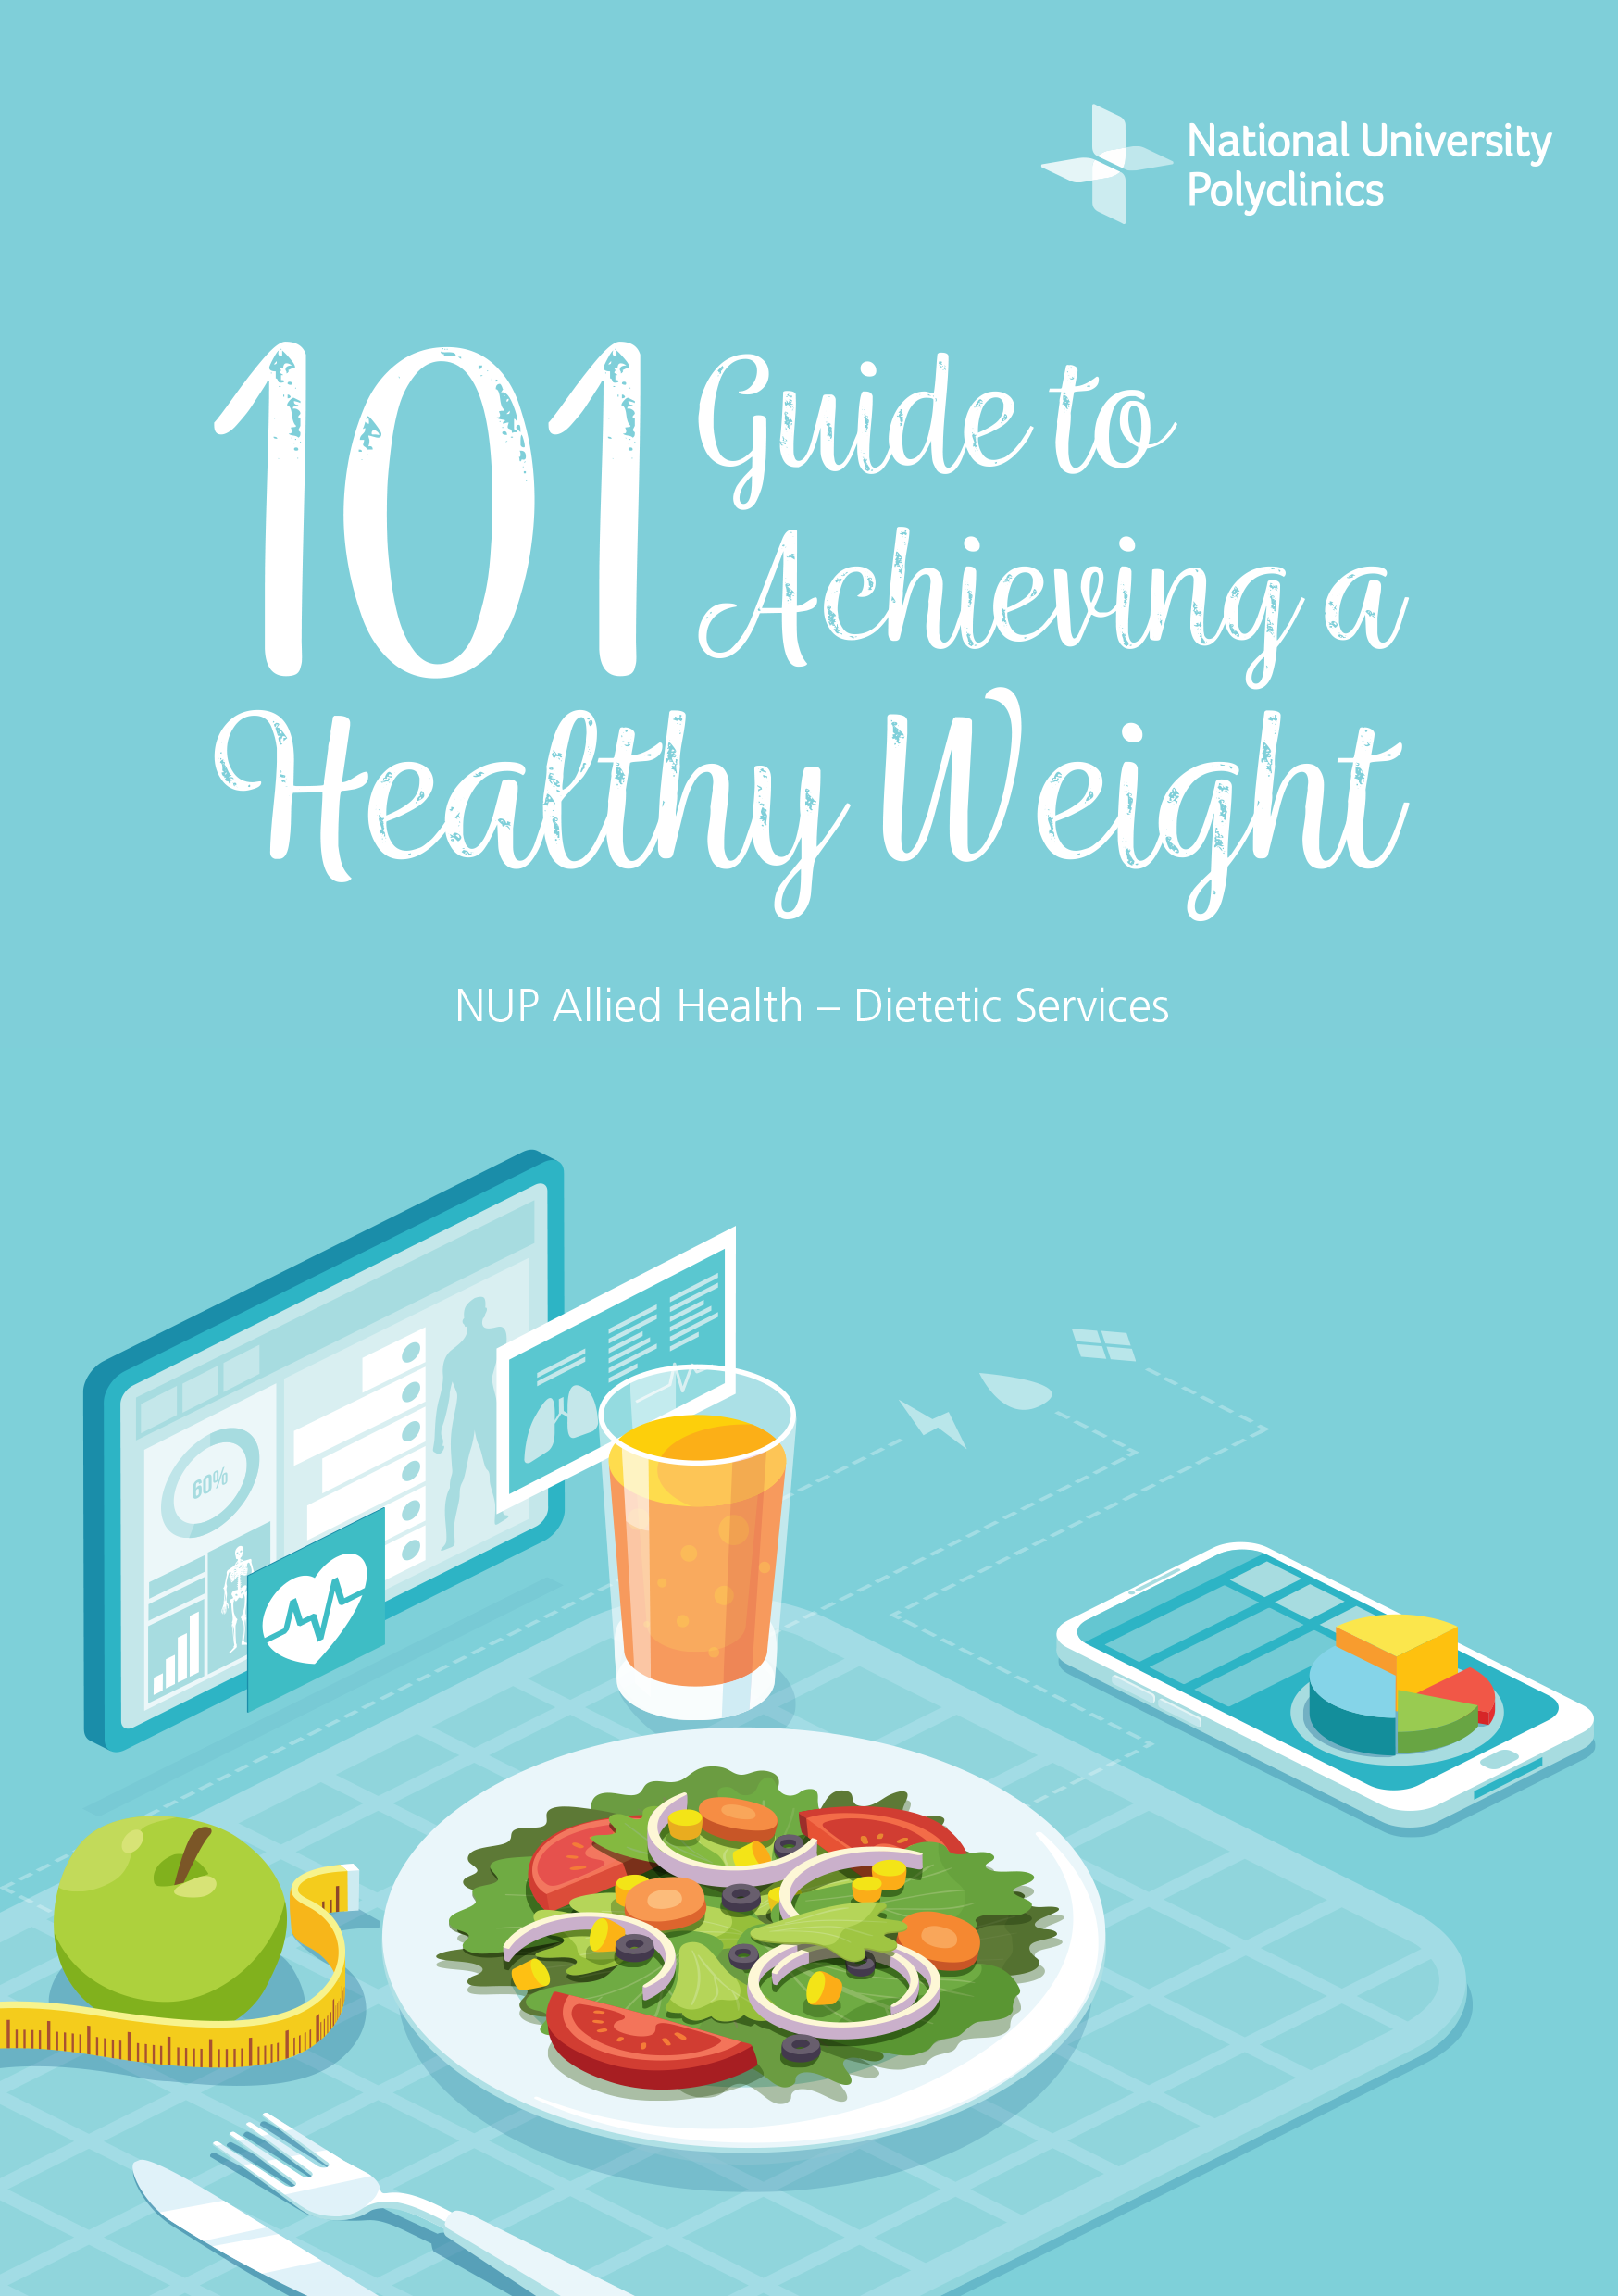 101 Guide to Achieving a Healthy Weight (English)